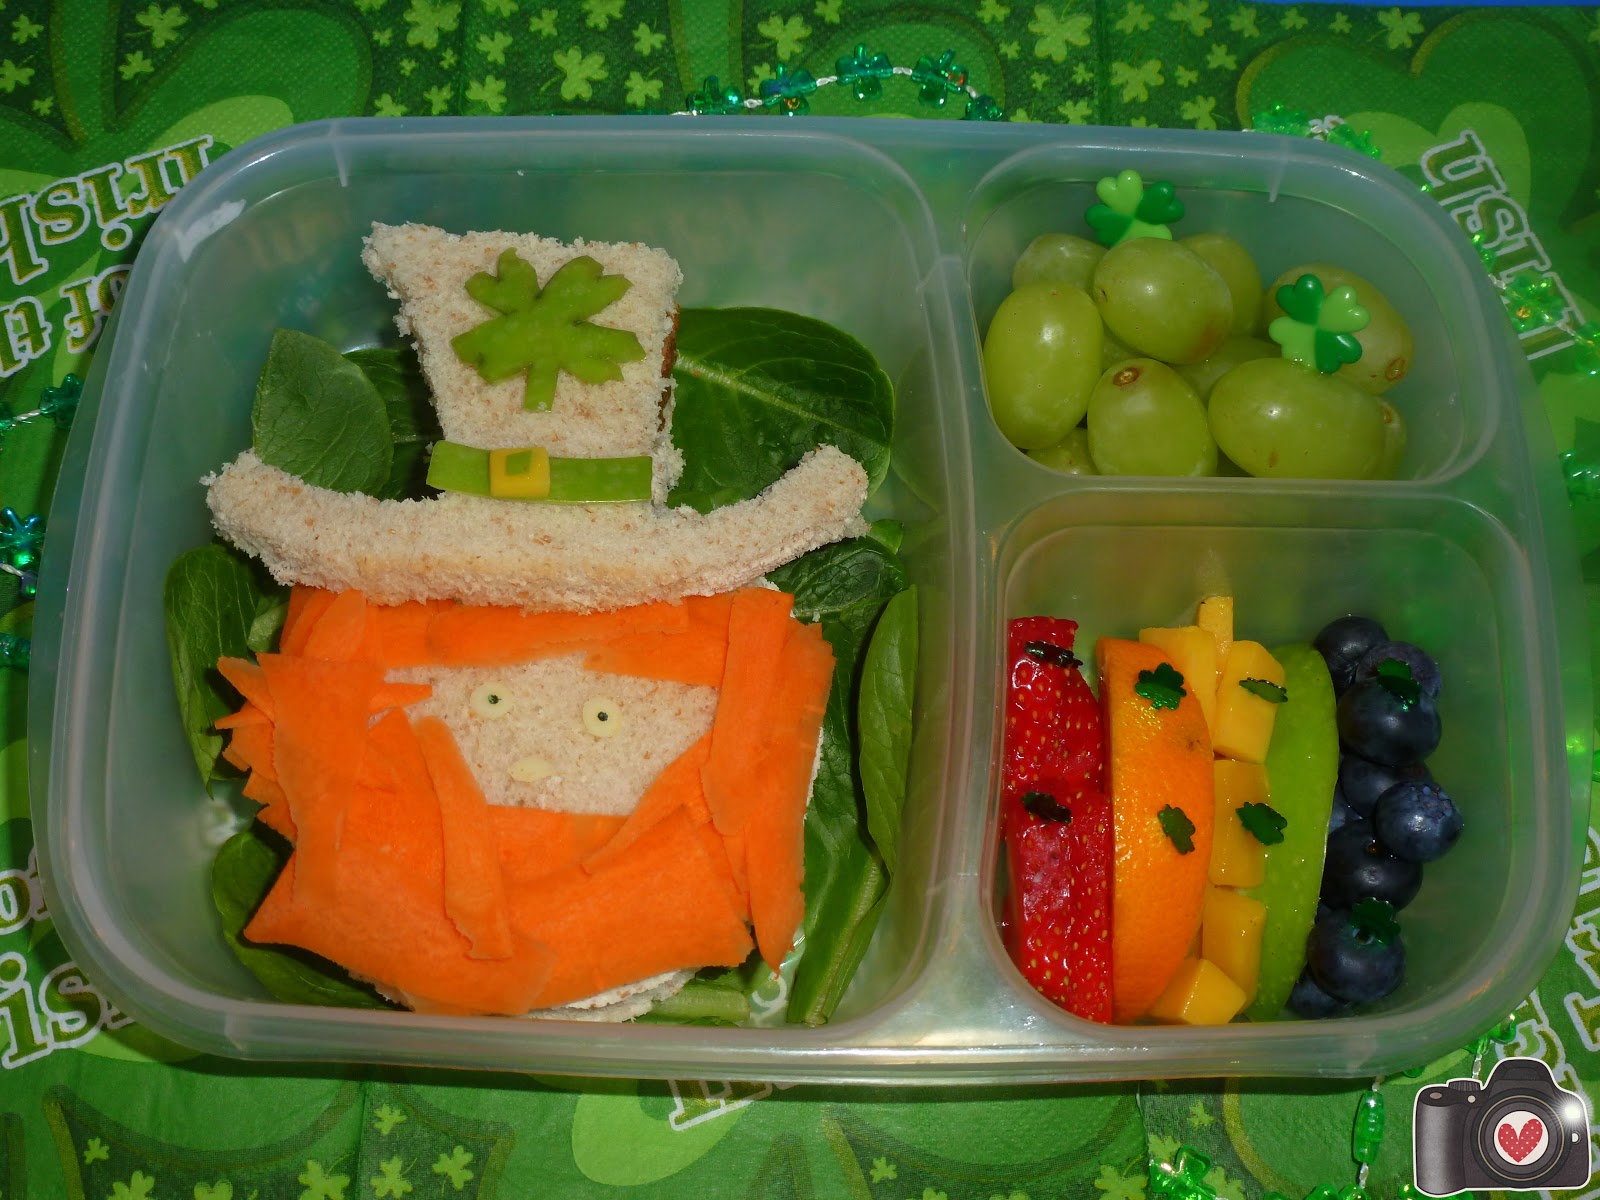 Mamabelly's Lunches With Love: Happy Birthday, Dr. Seuss